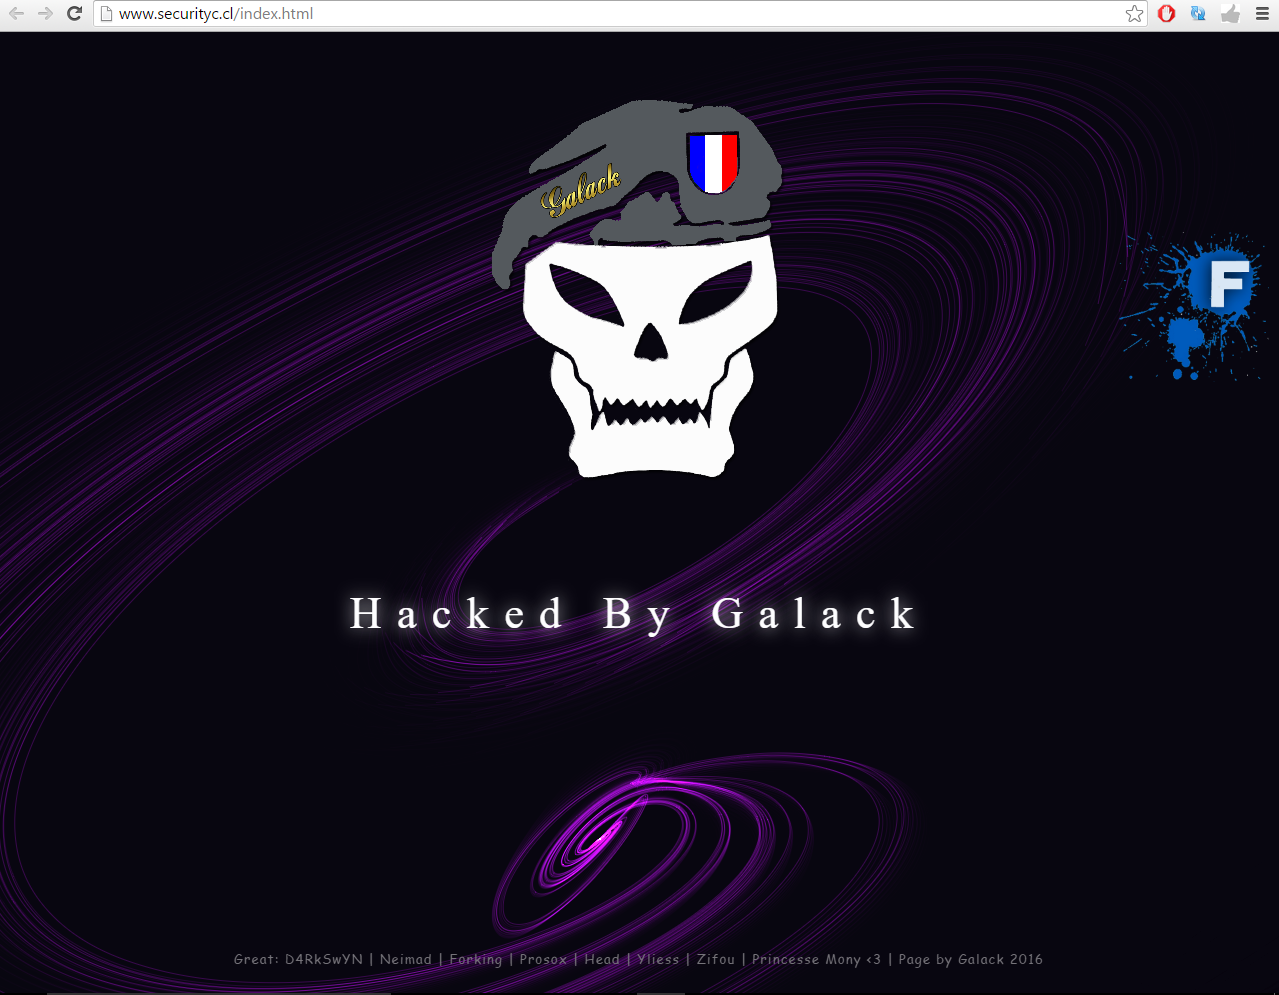 Hacked by Galack - French Hacker